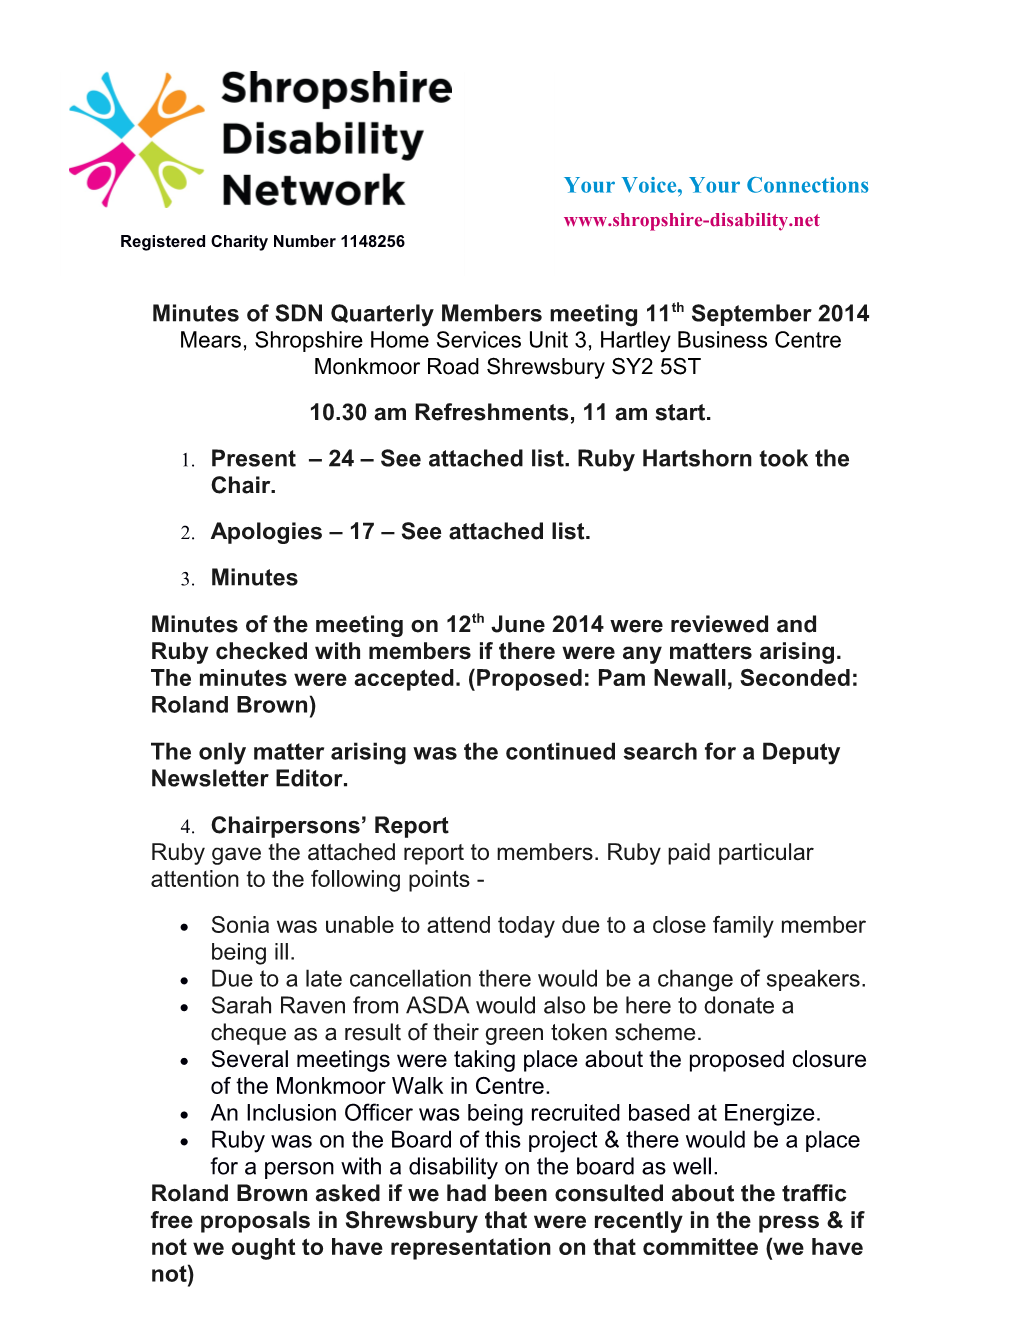 Minutes of SDN Quarterly Members Meeting 11Th September 2014